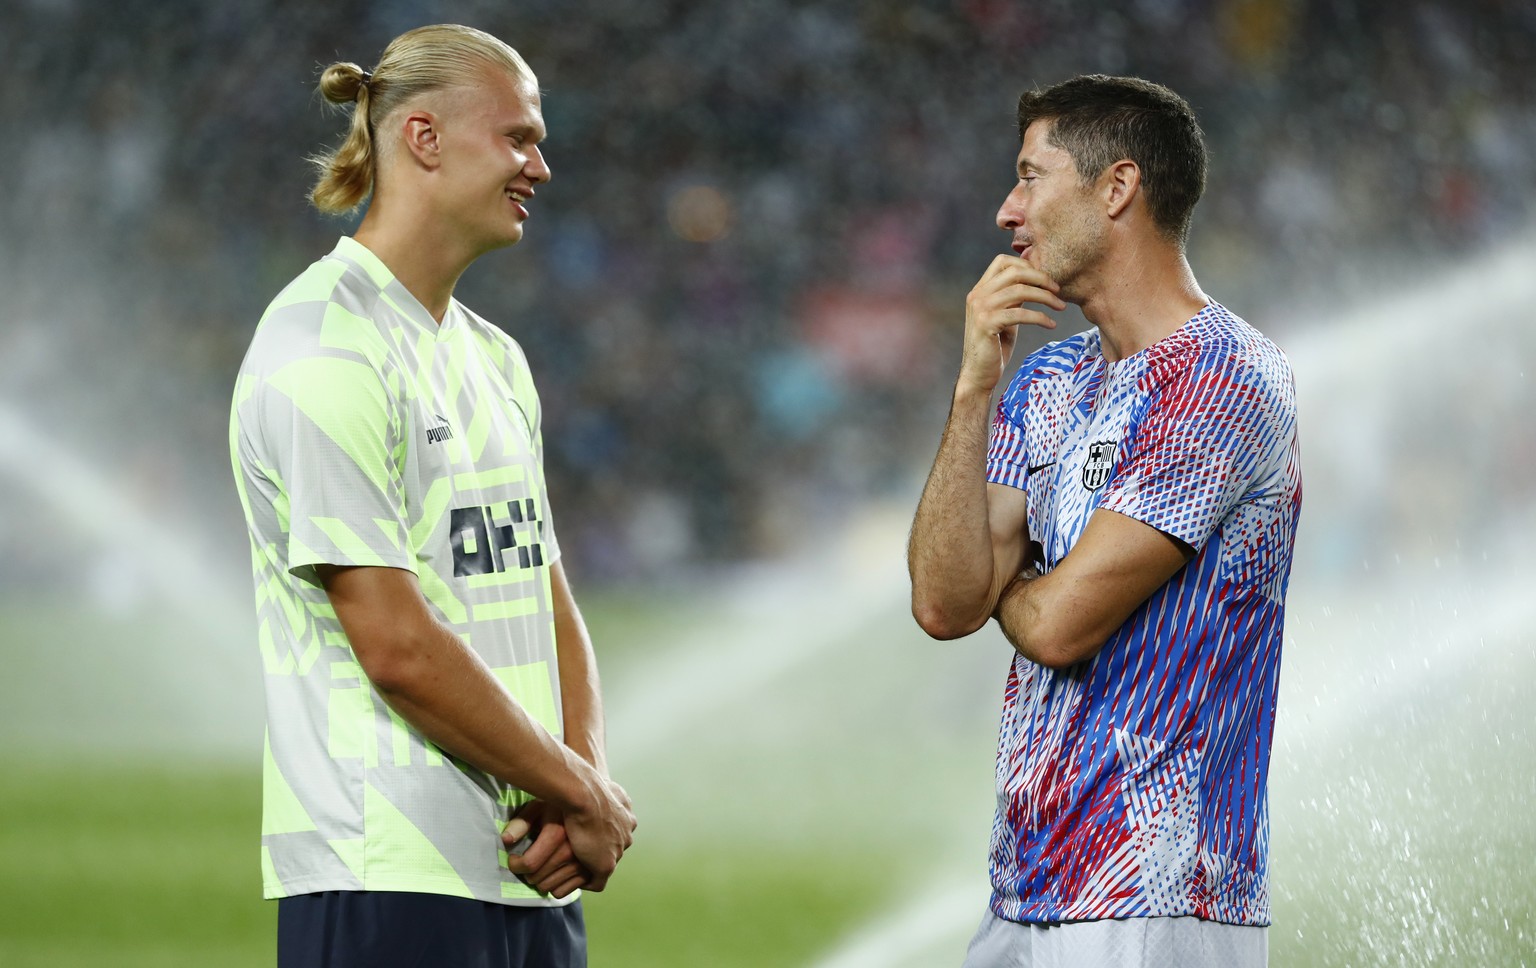 Manchester City's Erling Haaland, left, speaks with Barcelona's Robert Lewandowski ahead of a charity friendly soccer match between Barcelona and Manchester City at the Camp Nou stadium in Barcelona,  ...